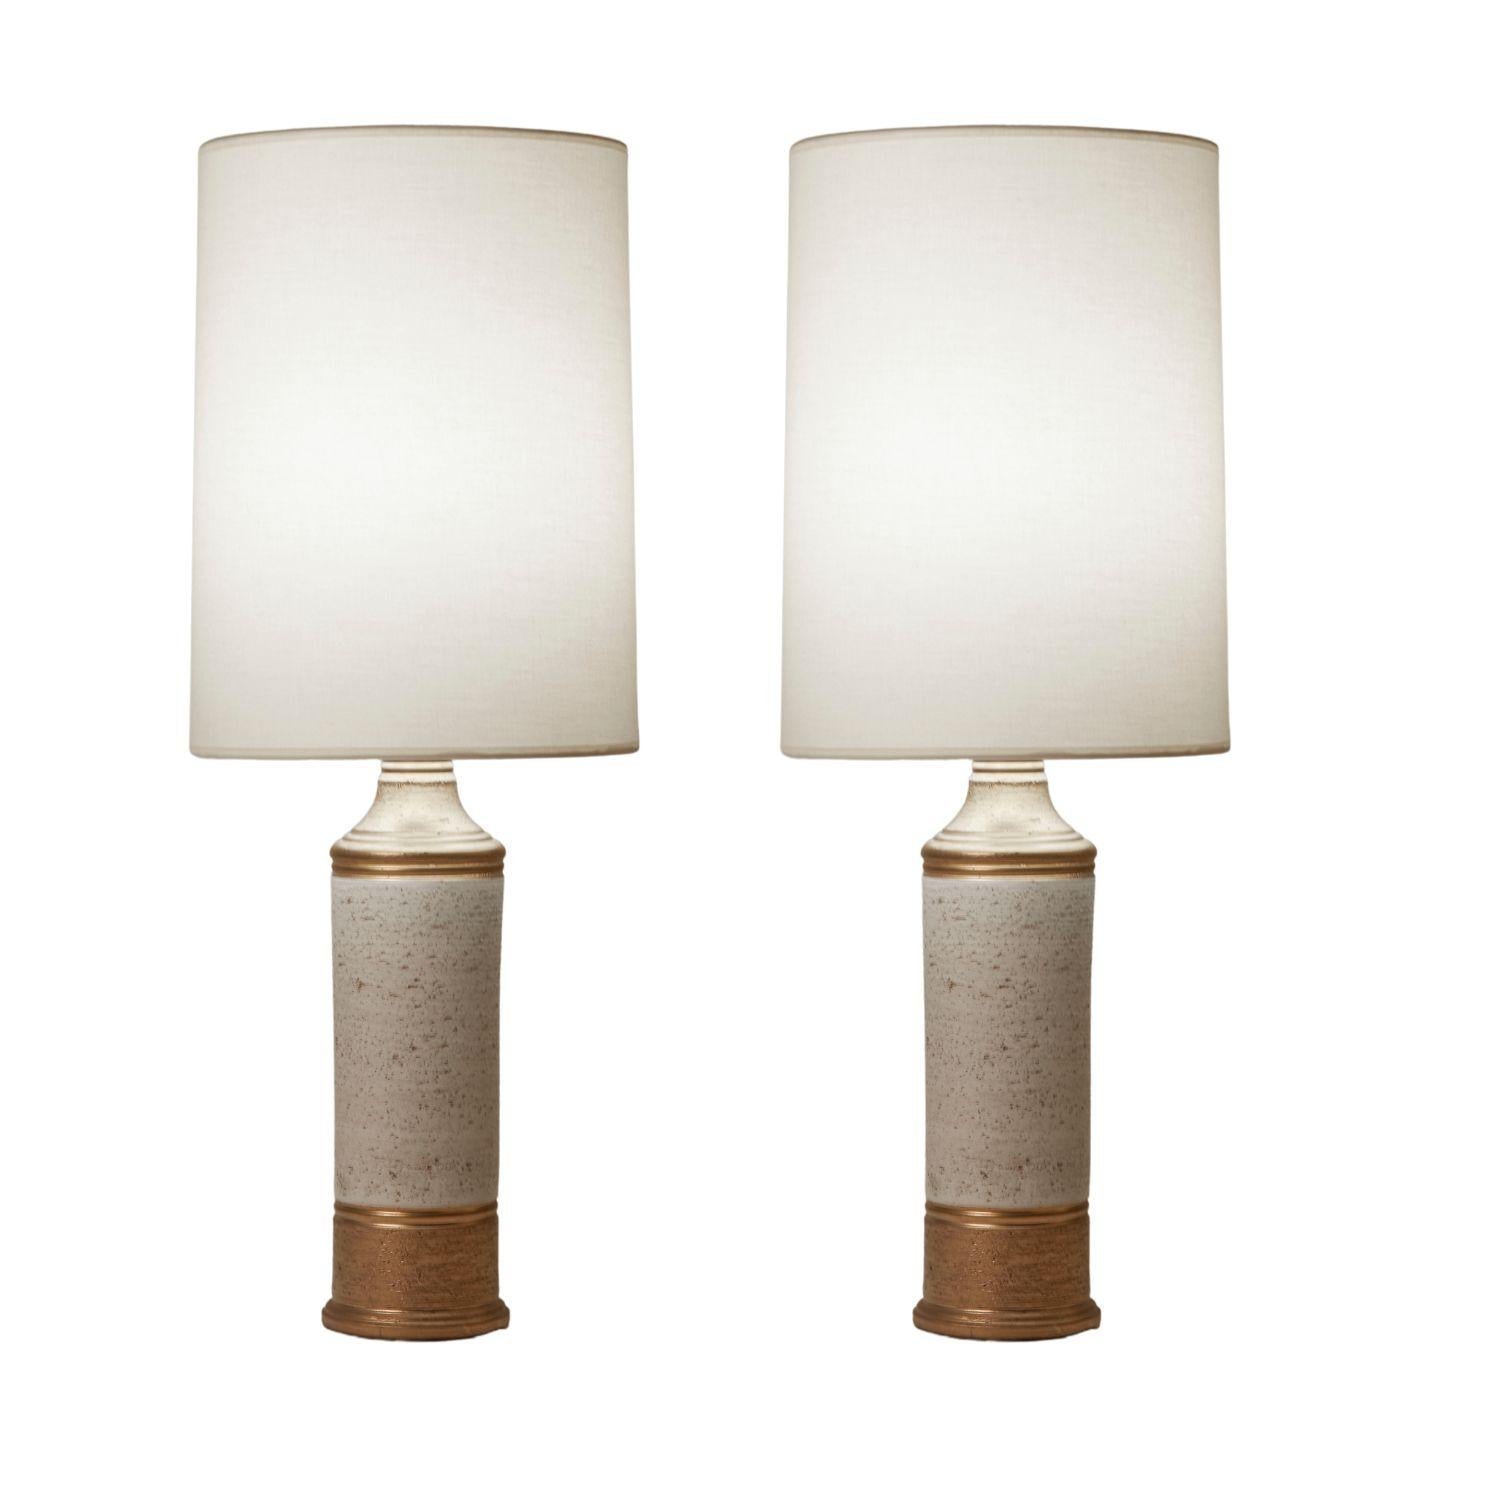 1960's Sweden Bitossi for Bergboms Sweden Ceramic Pair of Lamps In Good Condition For Sale In Aspen, CO